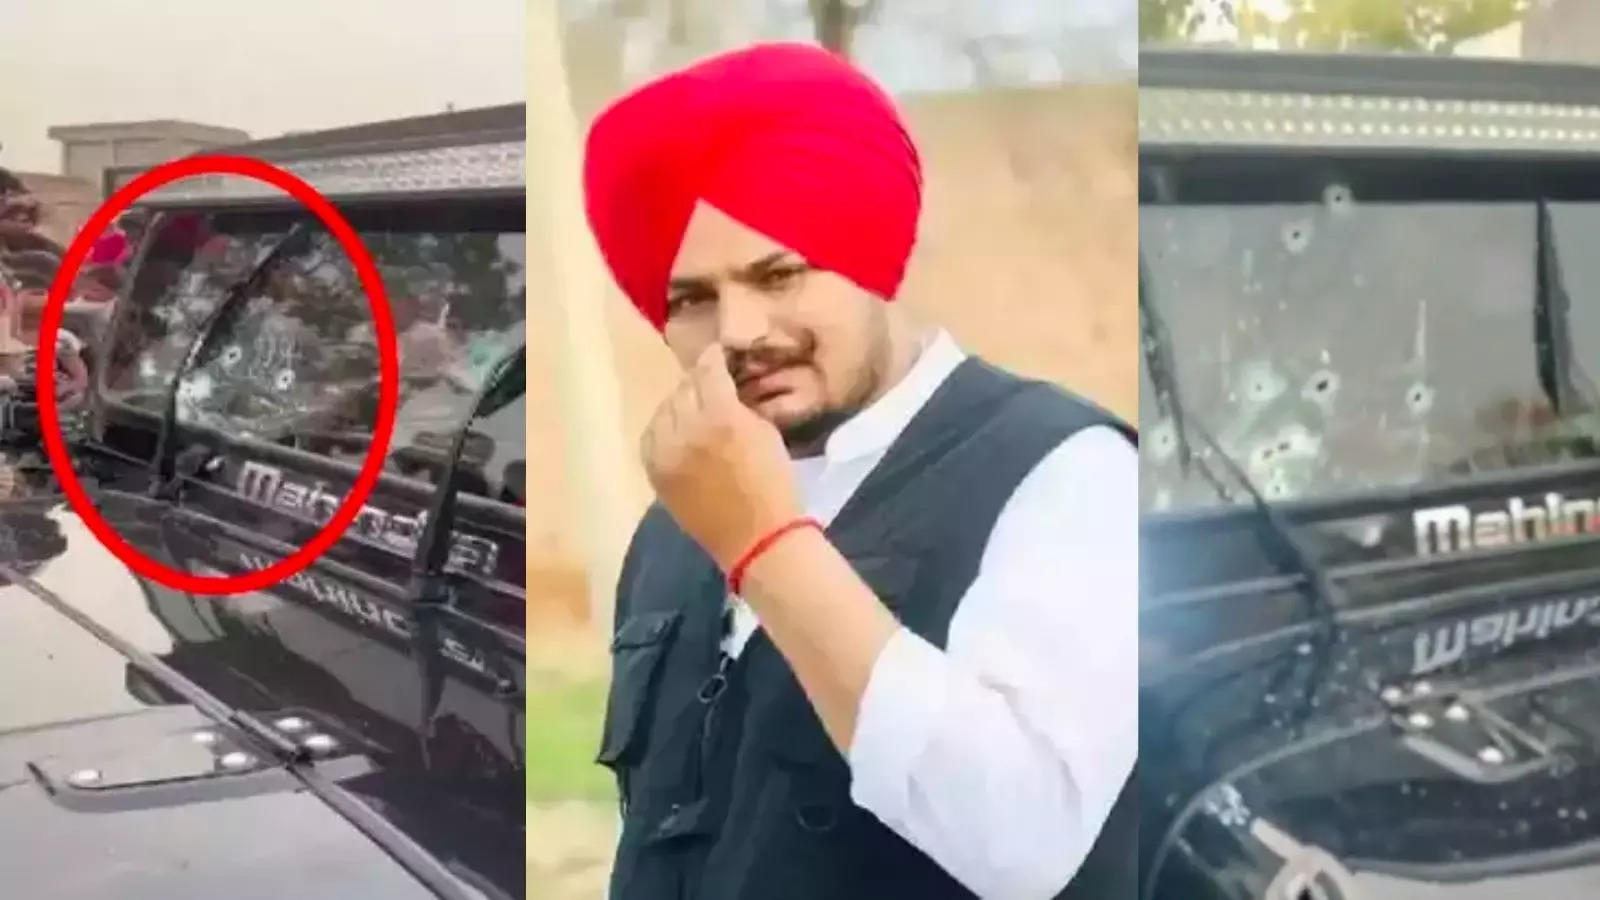 Sidhu Moose Wala murder: At least 3 weapons were used in attack, say cops | News - Times of India Videos